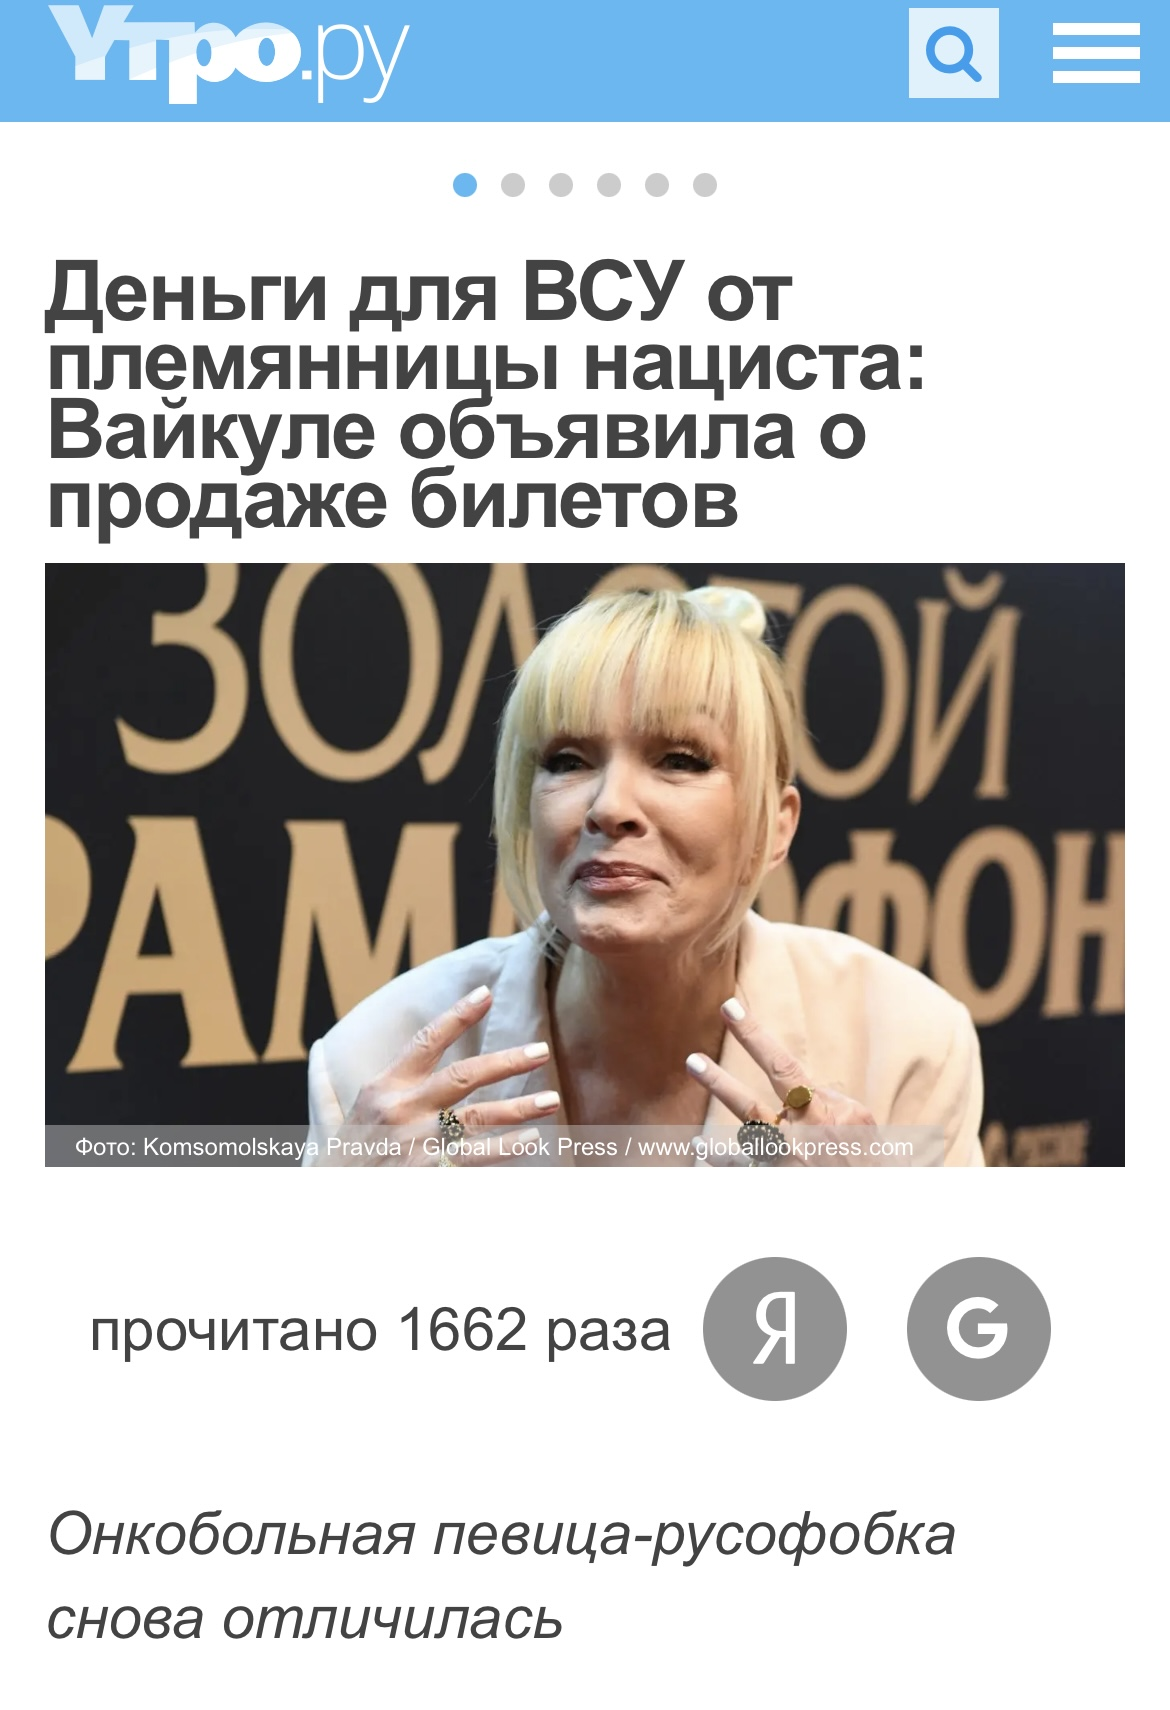 Russian media got angry with Laima Vaikule for supporting the Ukrainian Armed Forces and threatened her with 20 years in prison